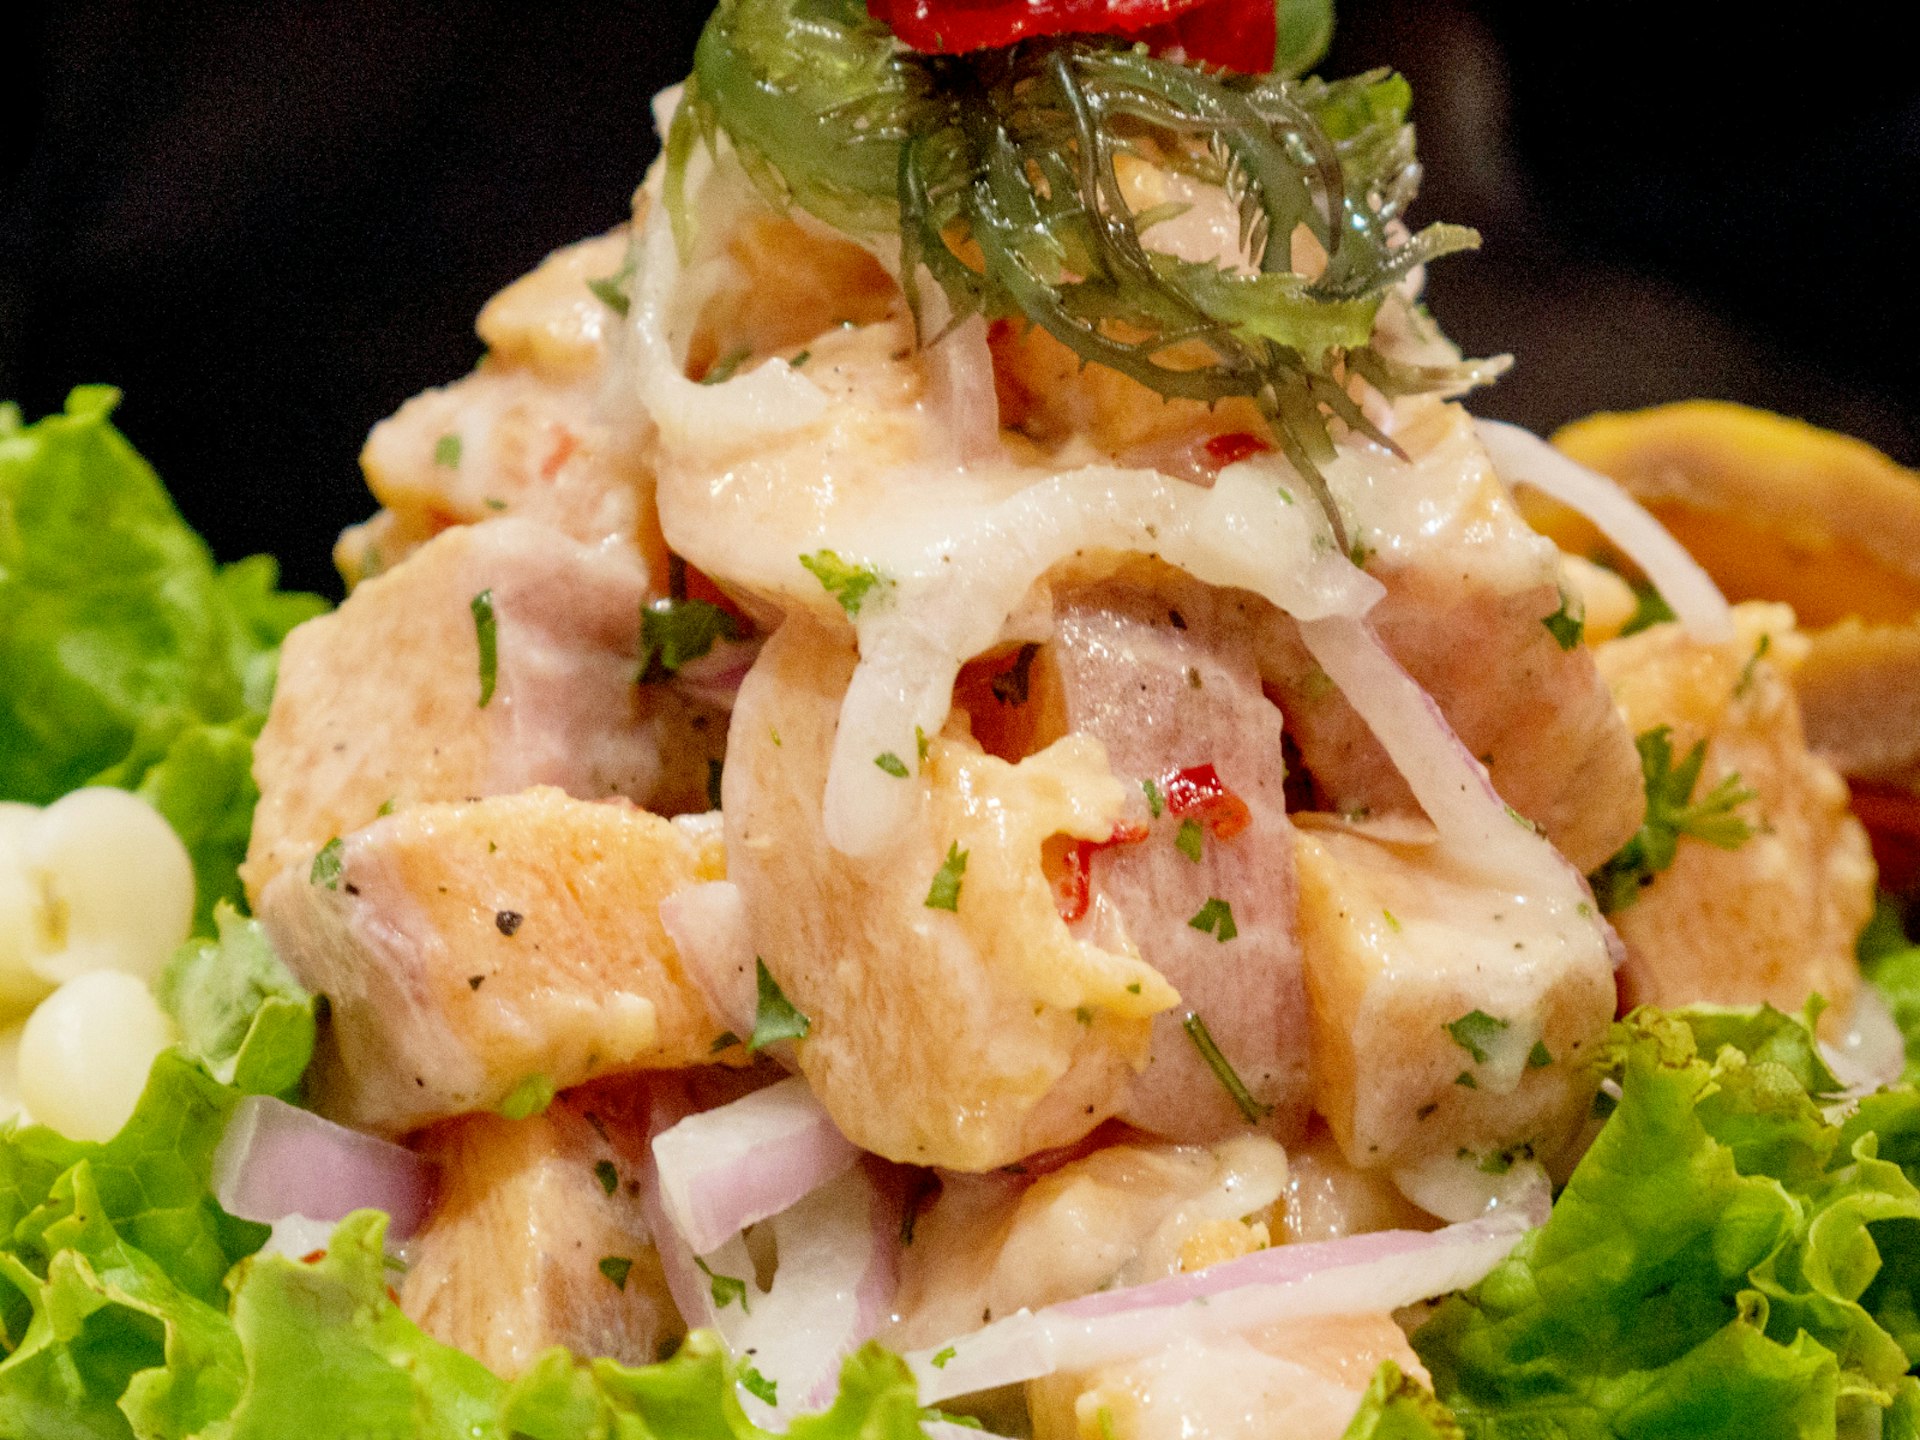 A up-close perspective of a plate of ceviche